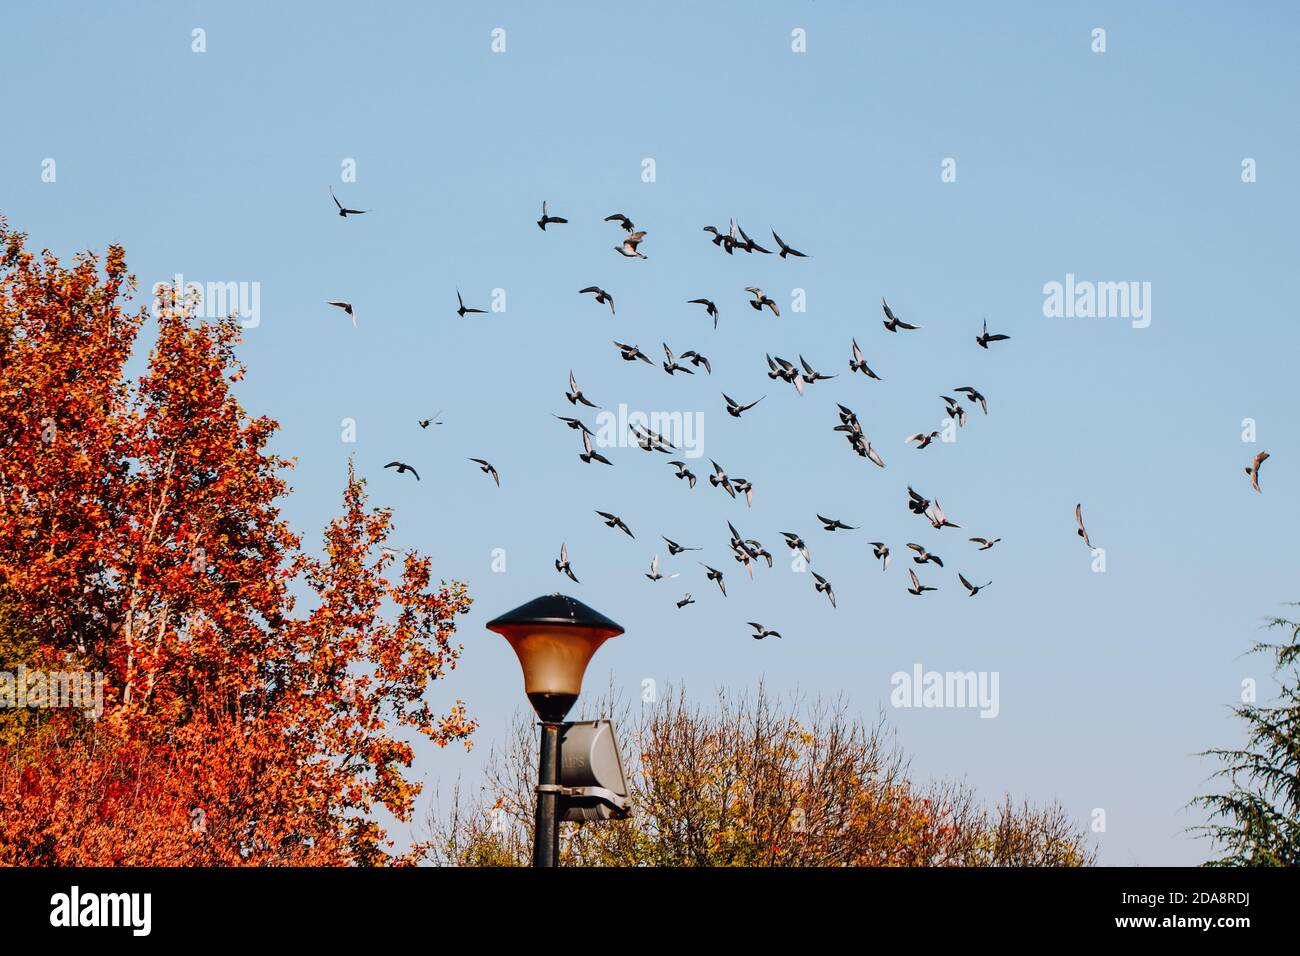 A flock of birds in the sky Stock Photo